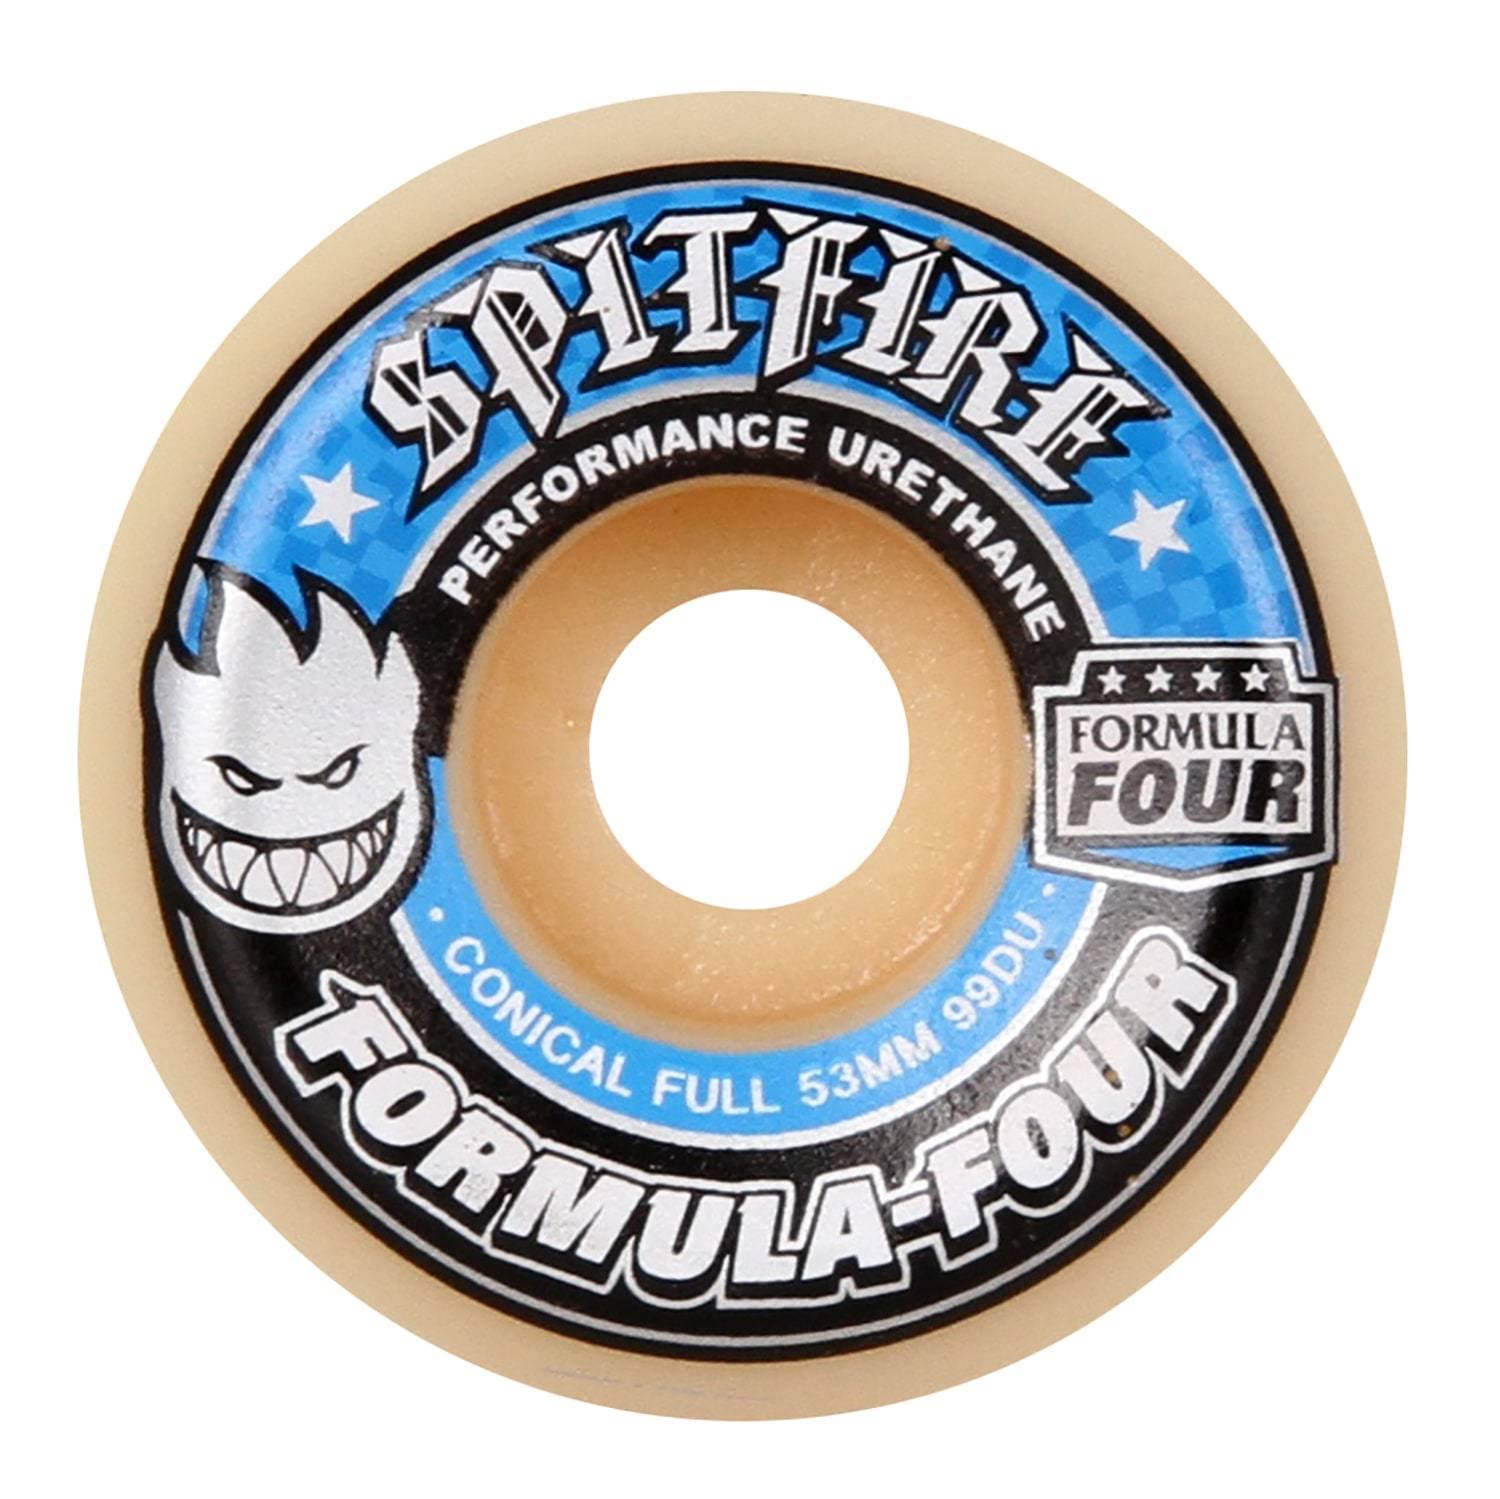 Spitfire F4 Conical Full Skateboard Wheels Set - White and Blue, 56mm